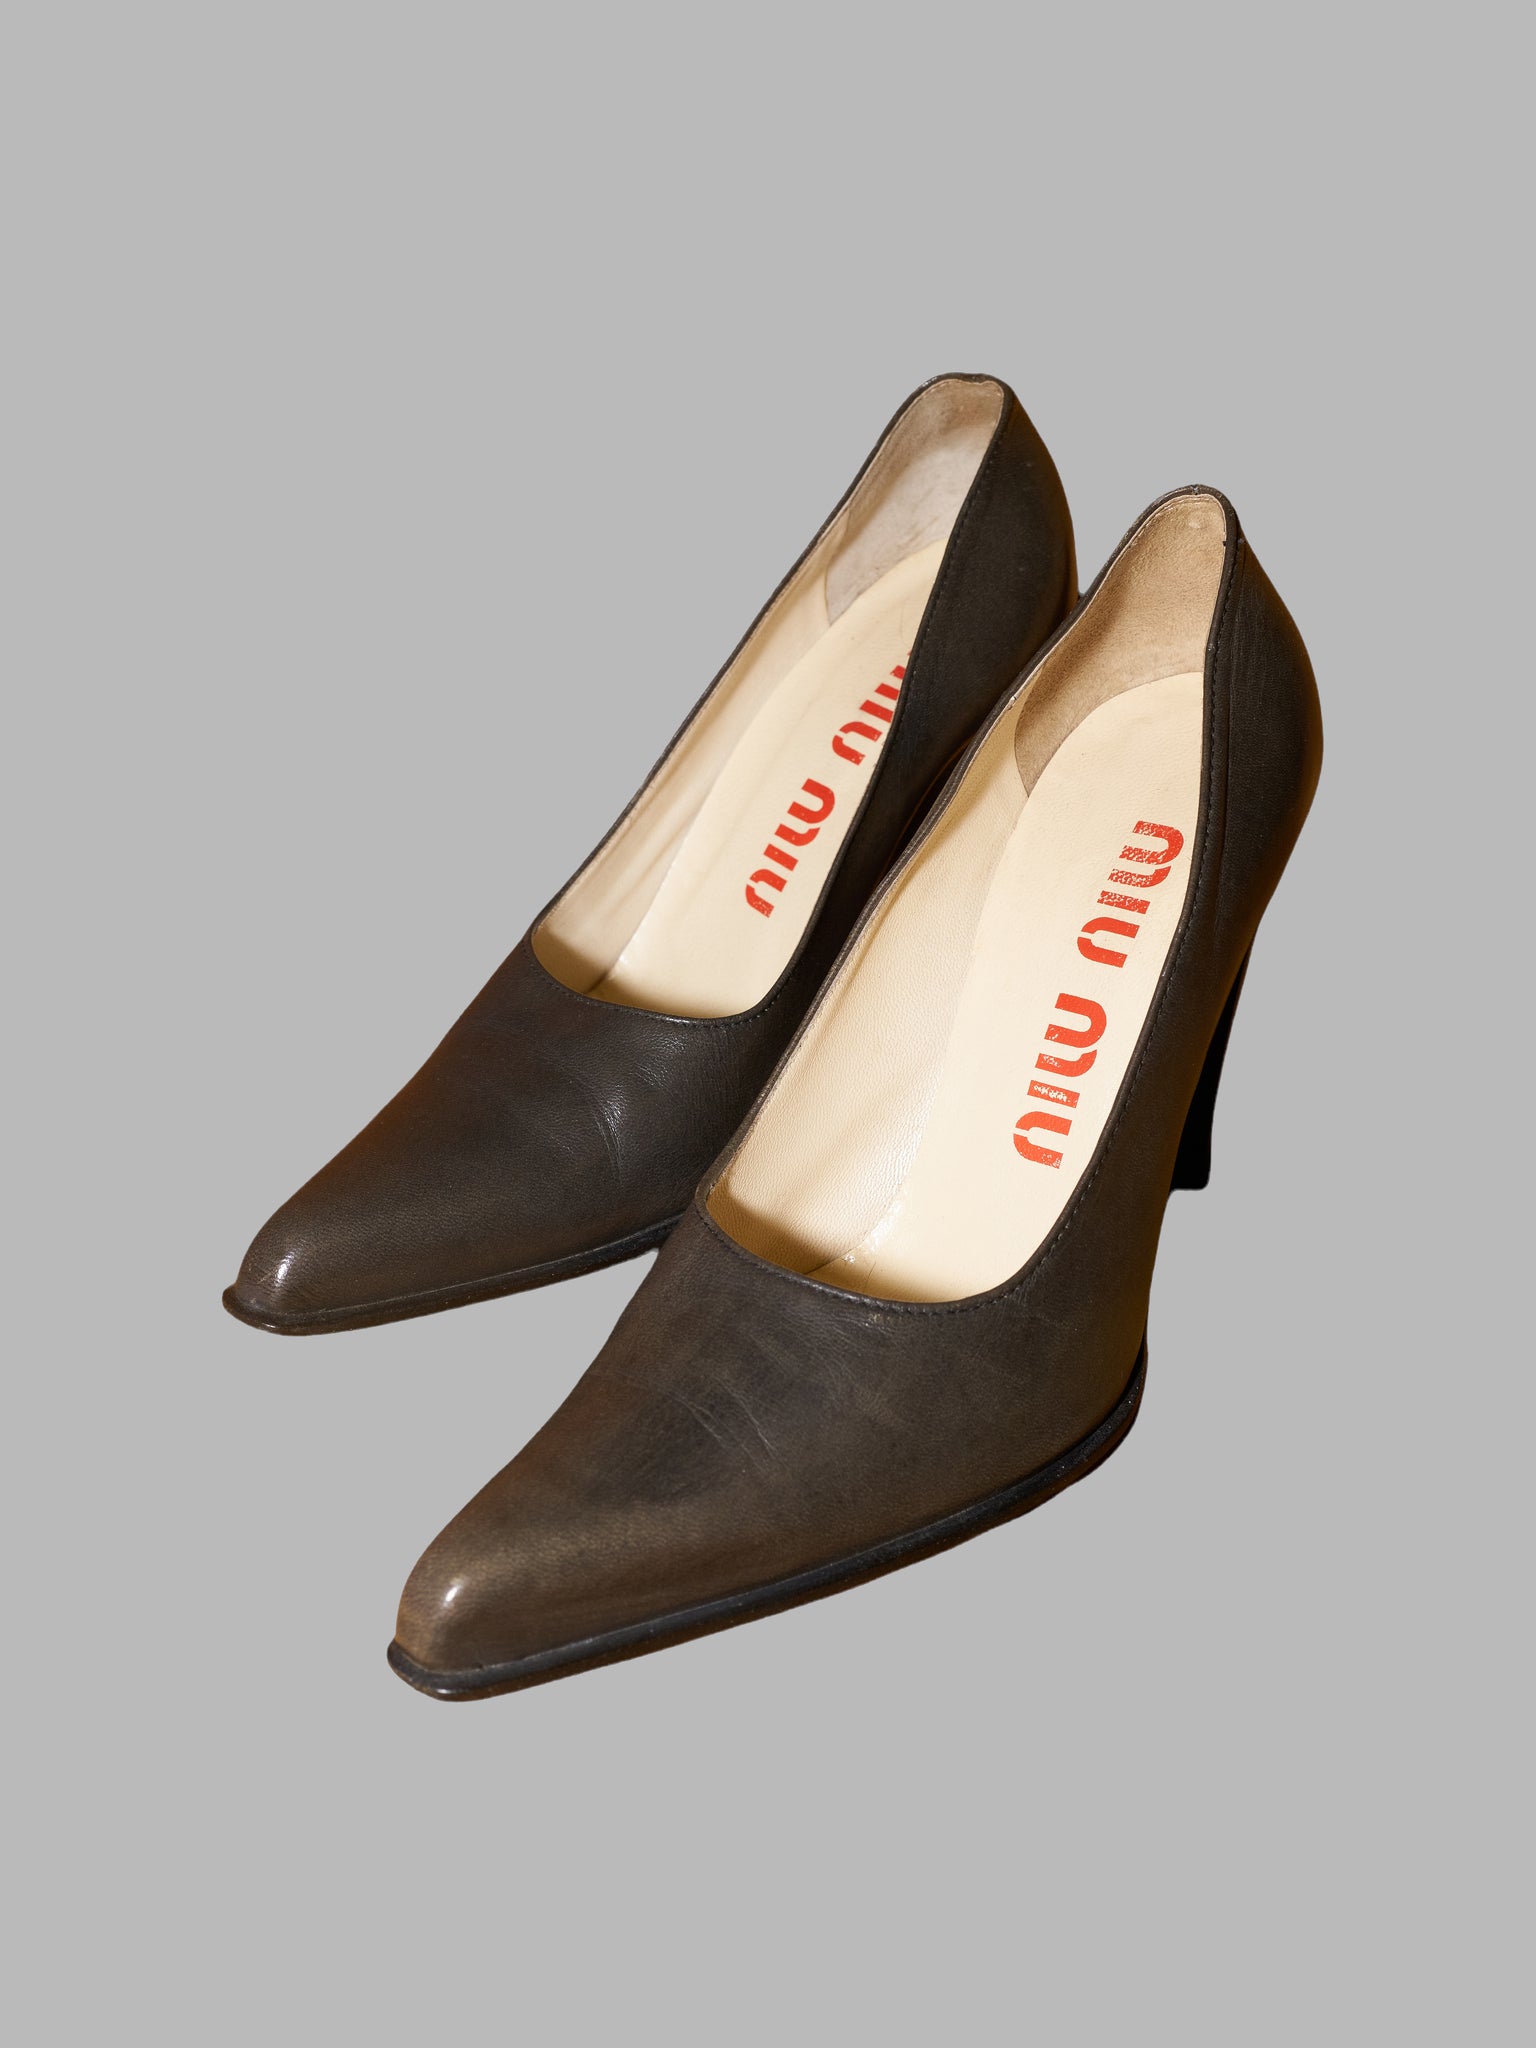 Miu Miu 1990s grey-y brown leather pointed toe high heel shoes - size 37 1/2